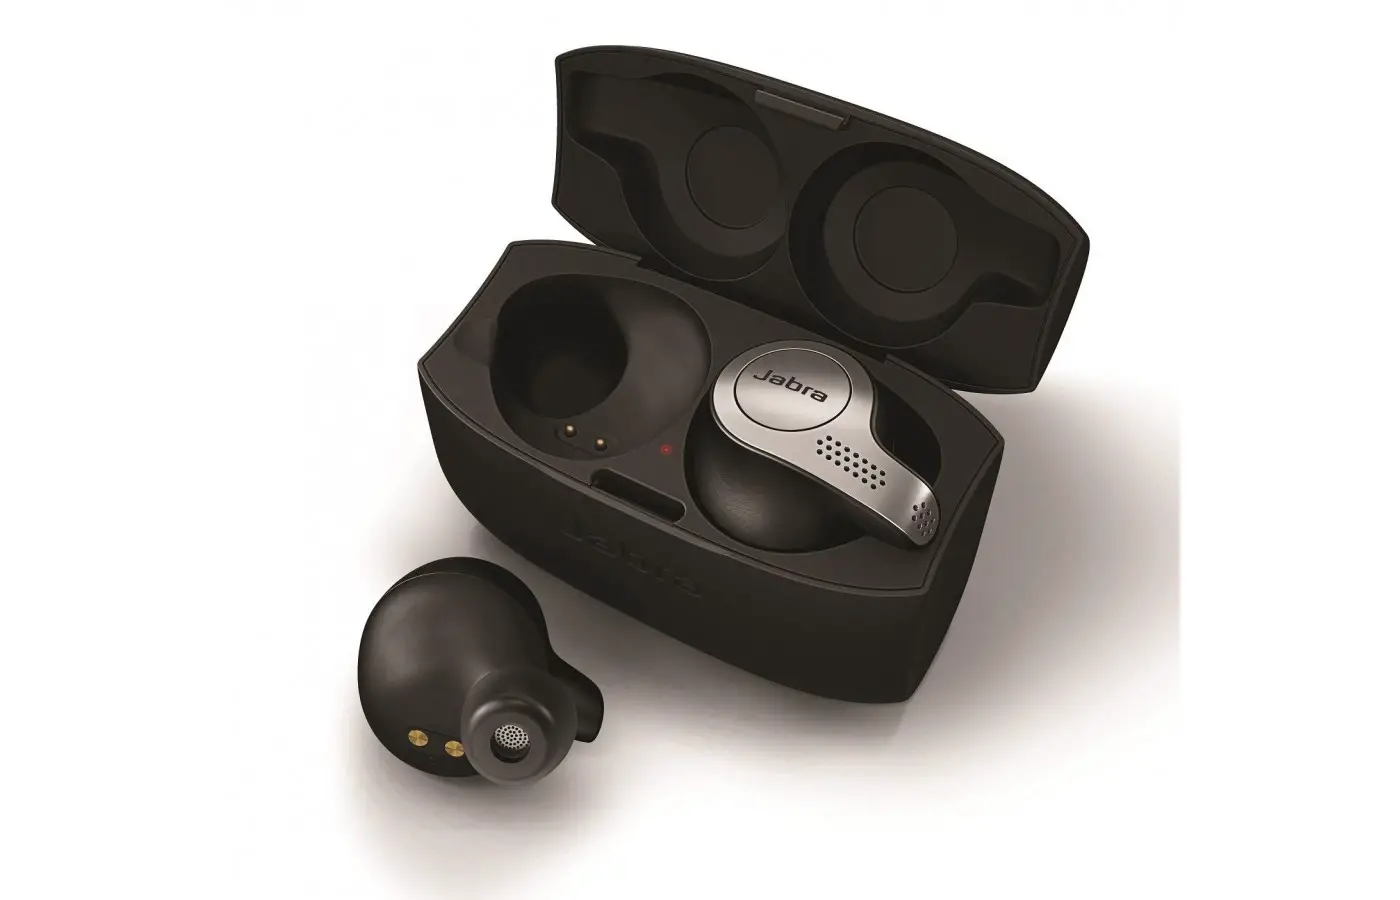 The Jabra Elite 65T offers a rechargeable carrying case that can charge the earphones to a full charge when on the go. 